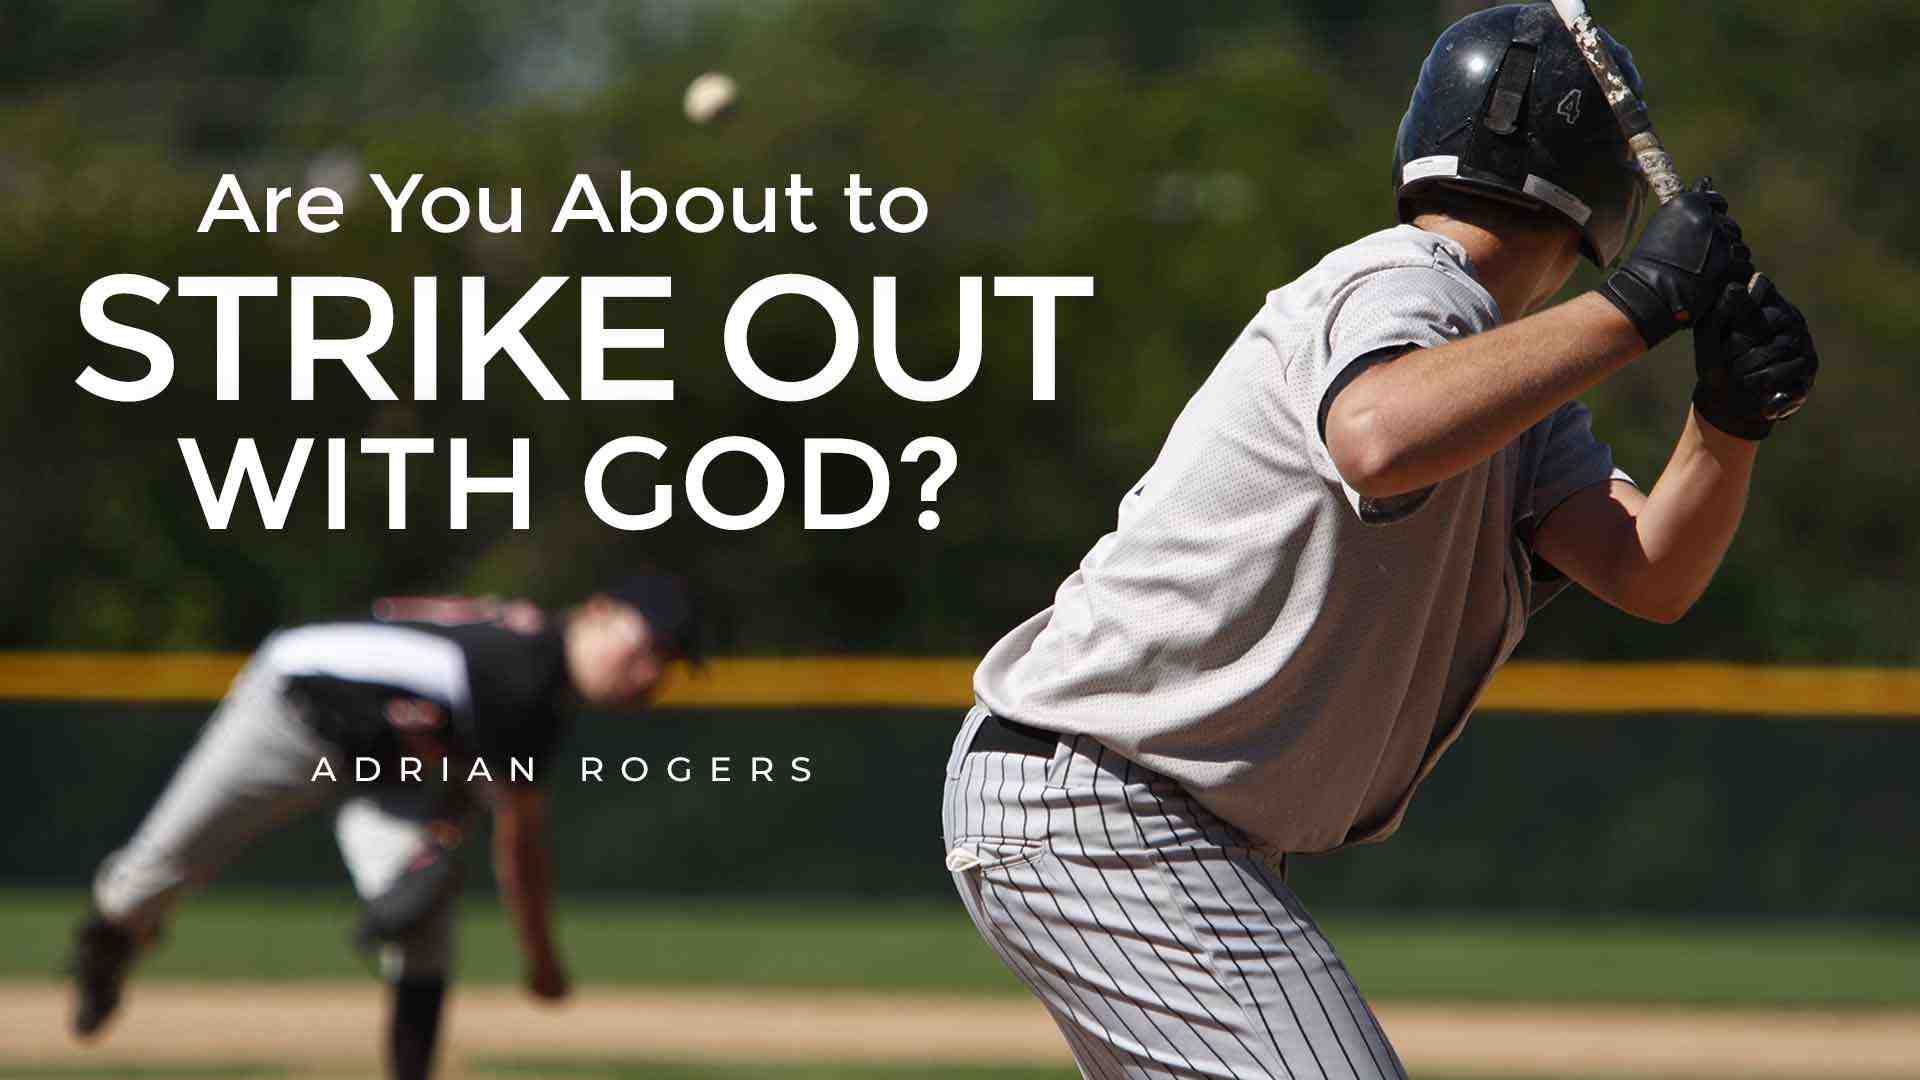 Are You About to Strike Out With God 1920x1080